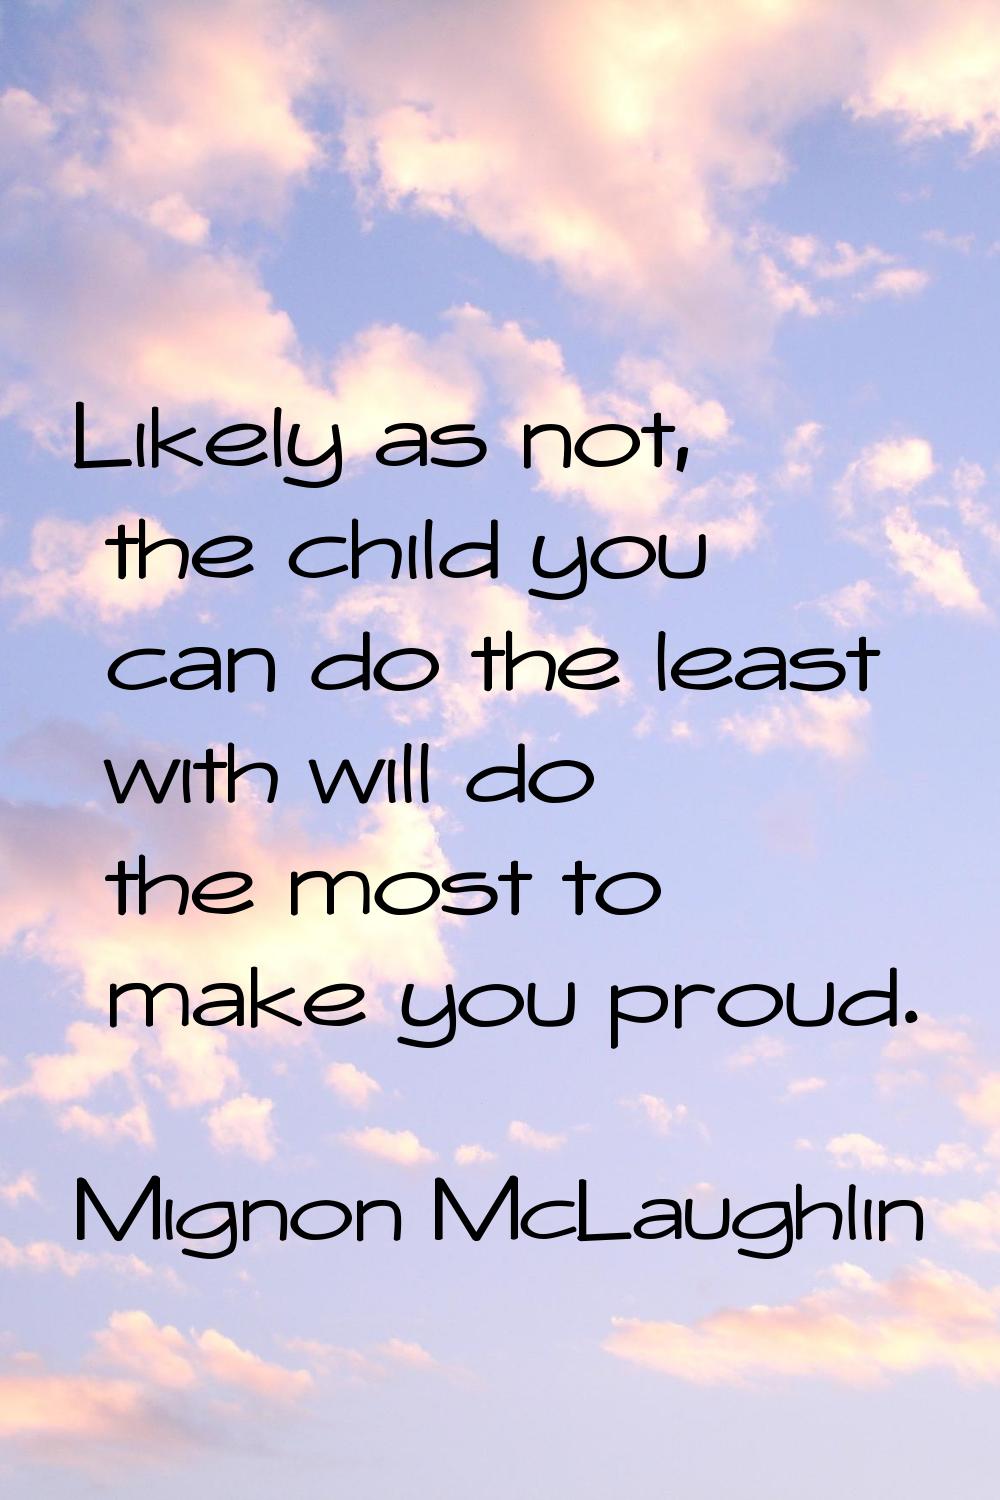 Likely as not, the child you can do the least with will do the most to make you proud.